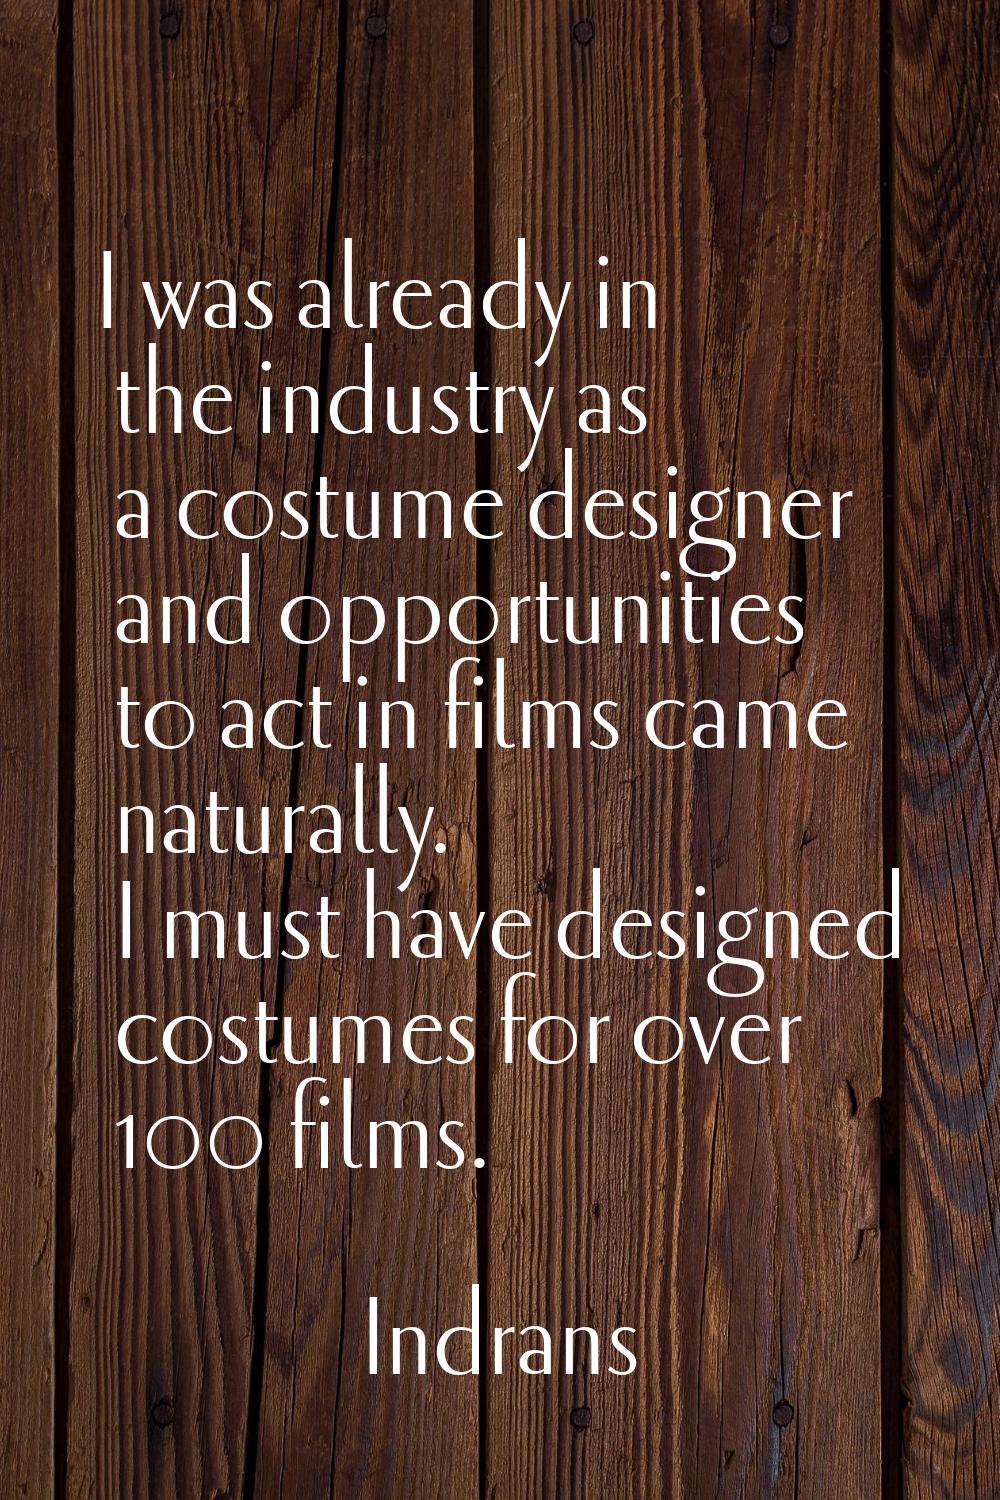 I was already in the industry as a costume designer and opportunities to act in films came naturall